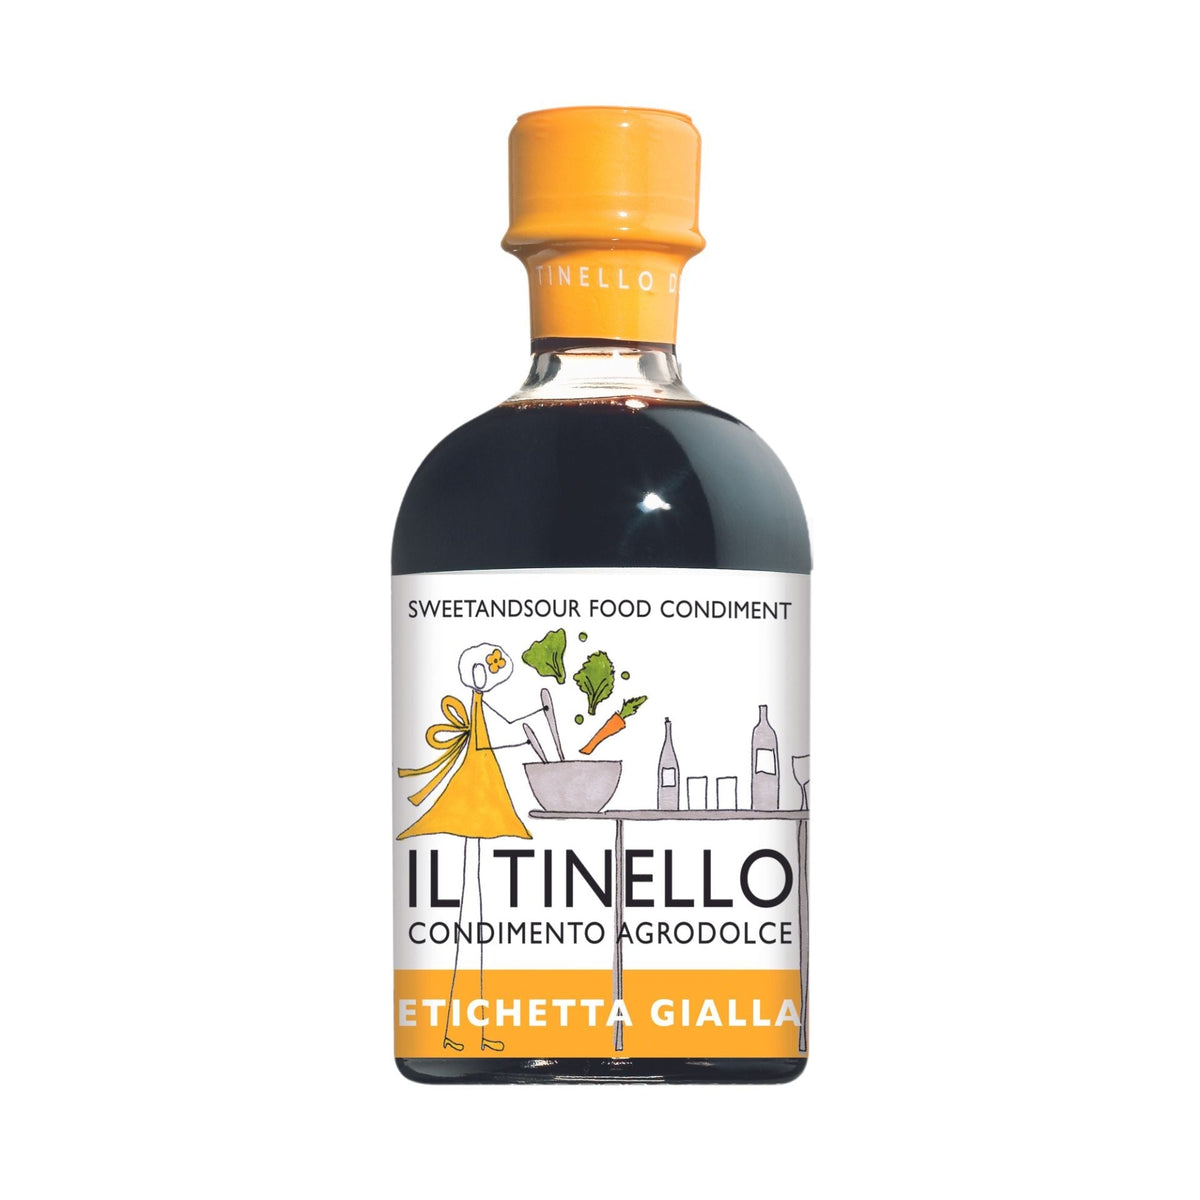 Il Borgo del Balsamico Il Tinello Balsamic Vinegar of Modena IGP Yellow Label High Acidity (without box) 250ml  | Imported and distributed in the UK by Just Gourmet Foods